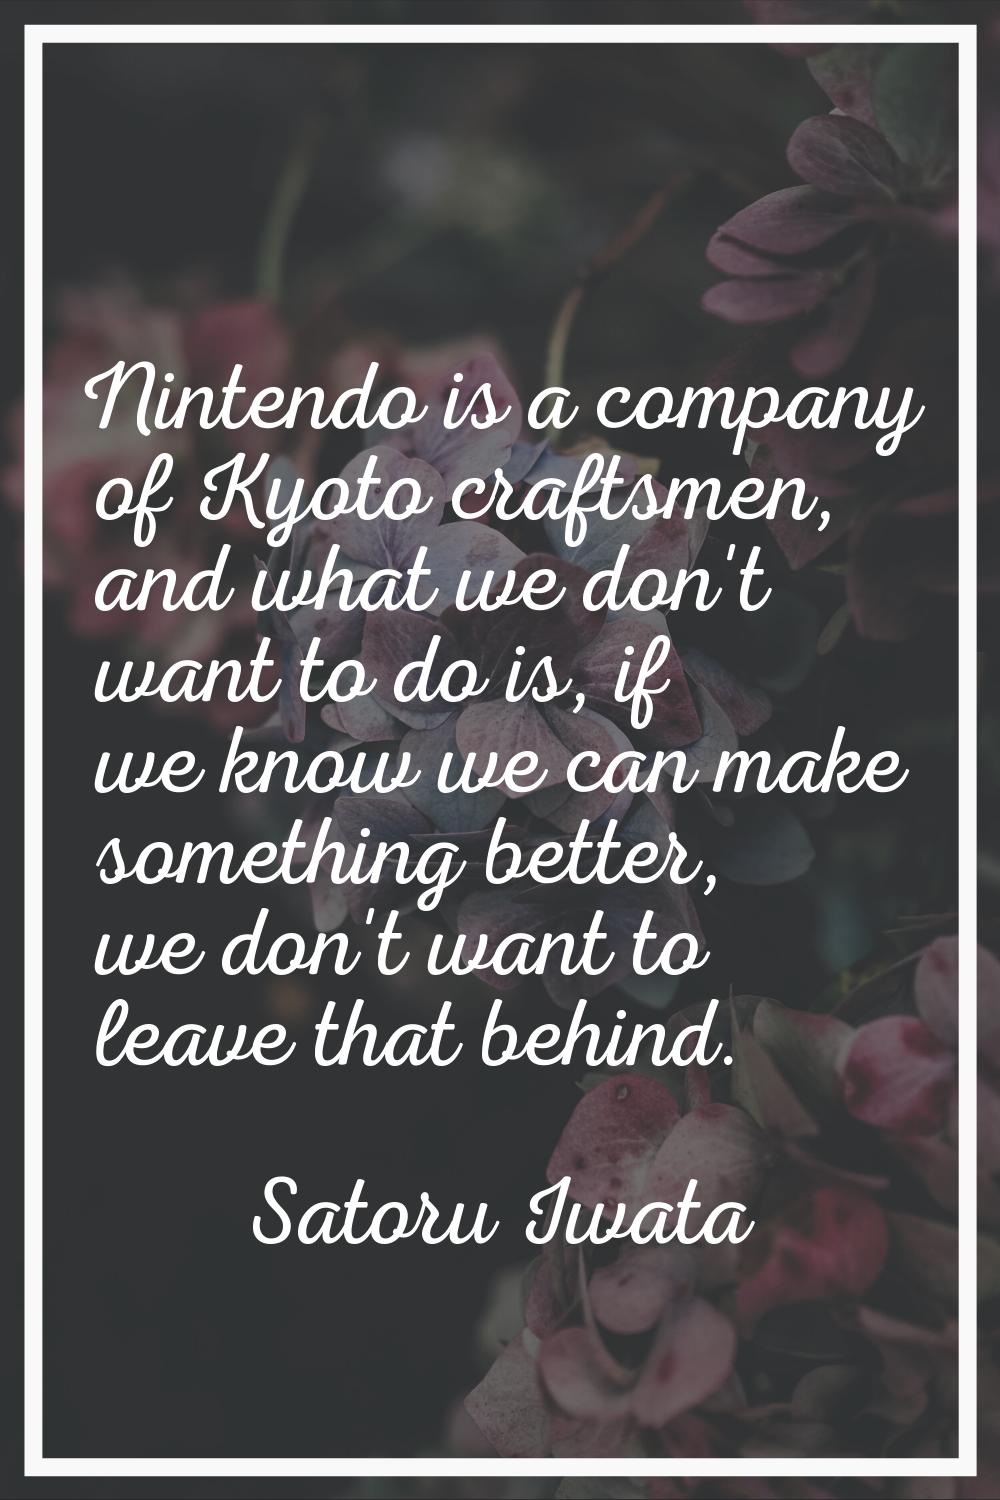 Nintendo is a company of Kyoto craftsmen, and what we don't want to do is, if we know we can make s